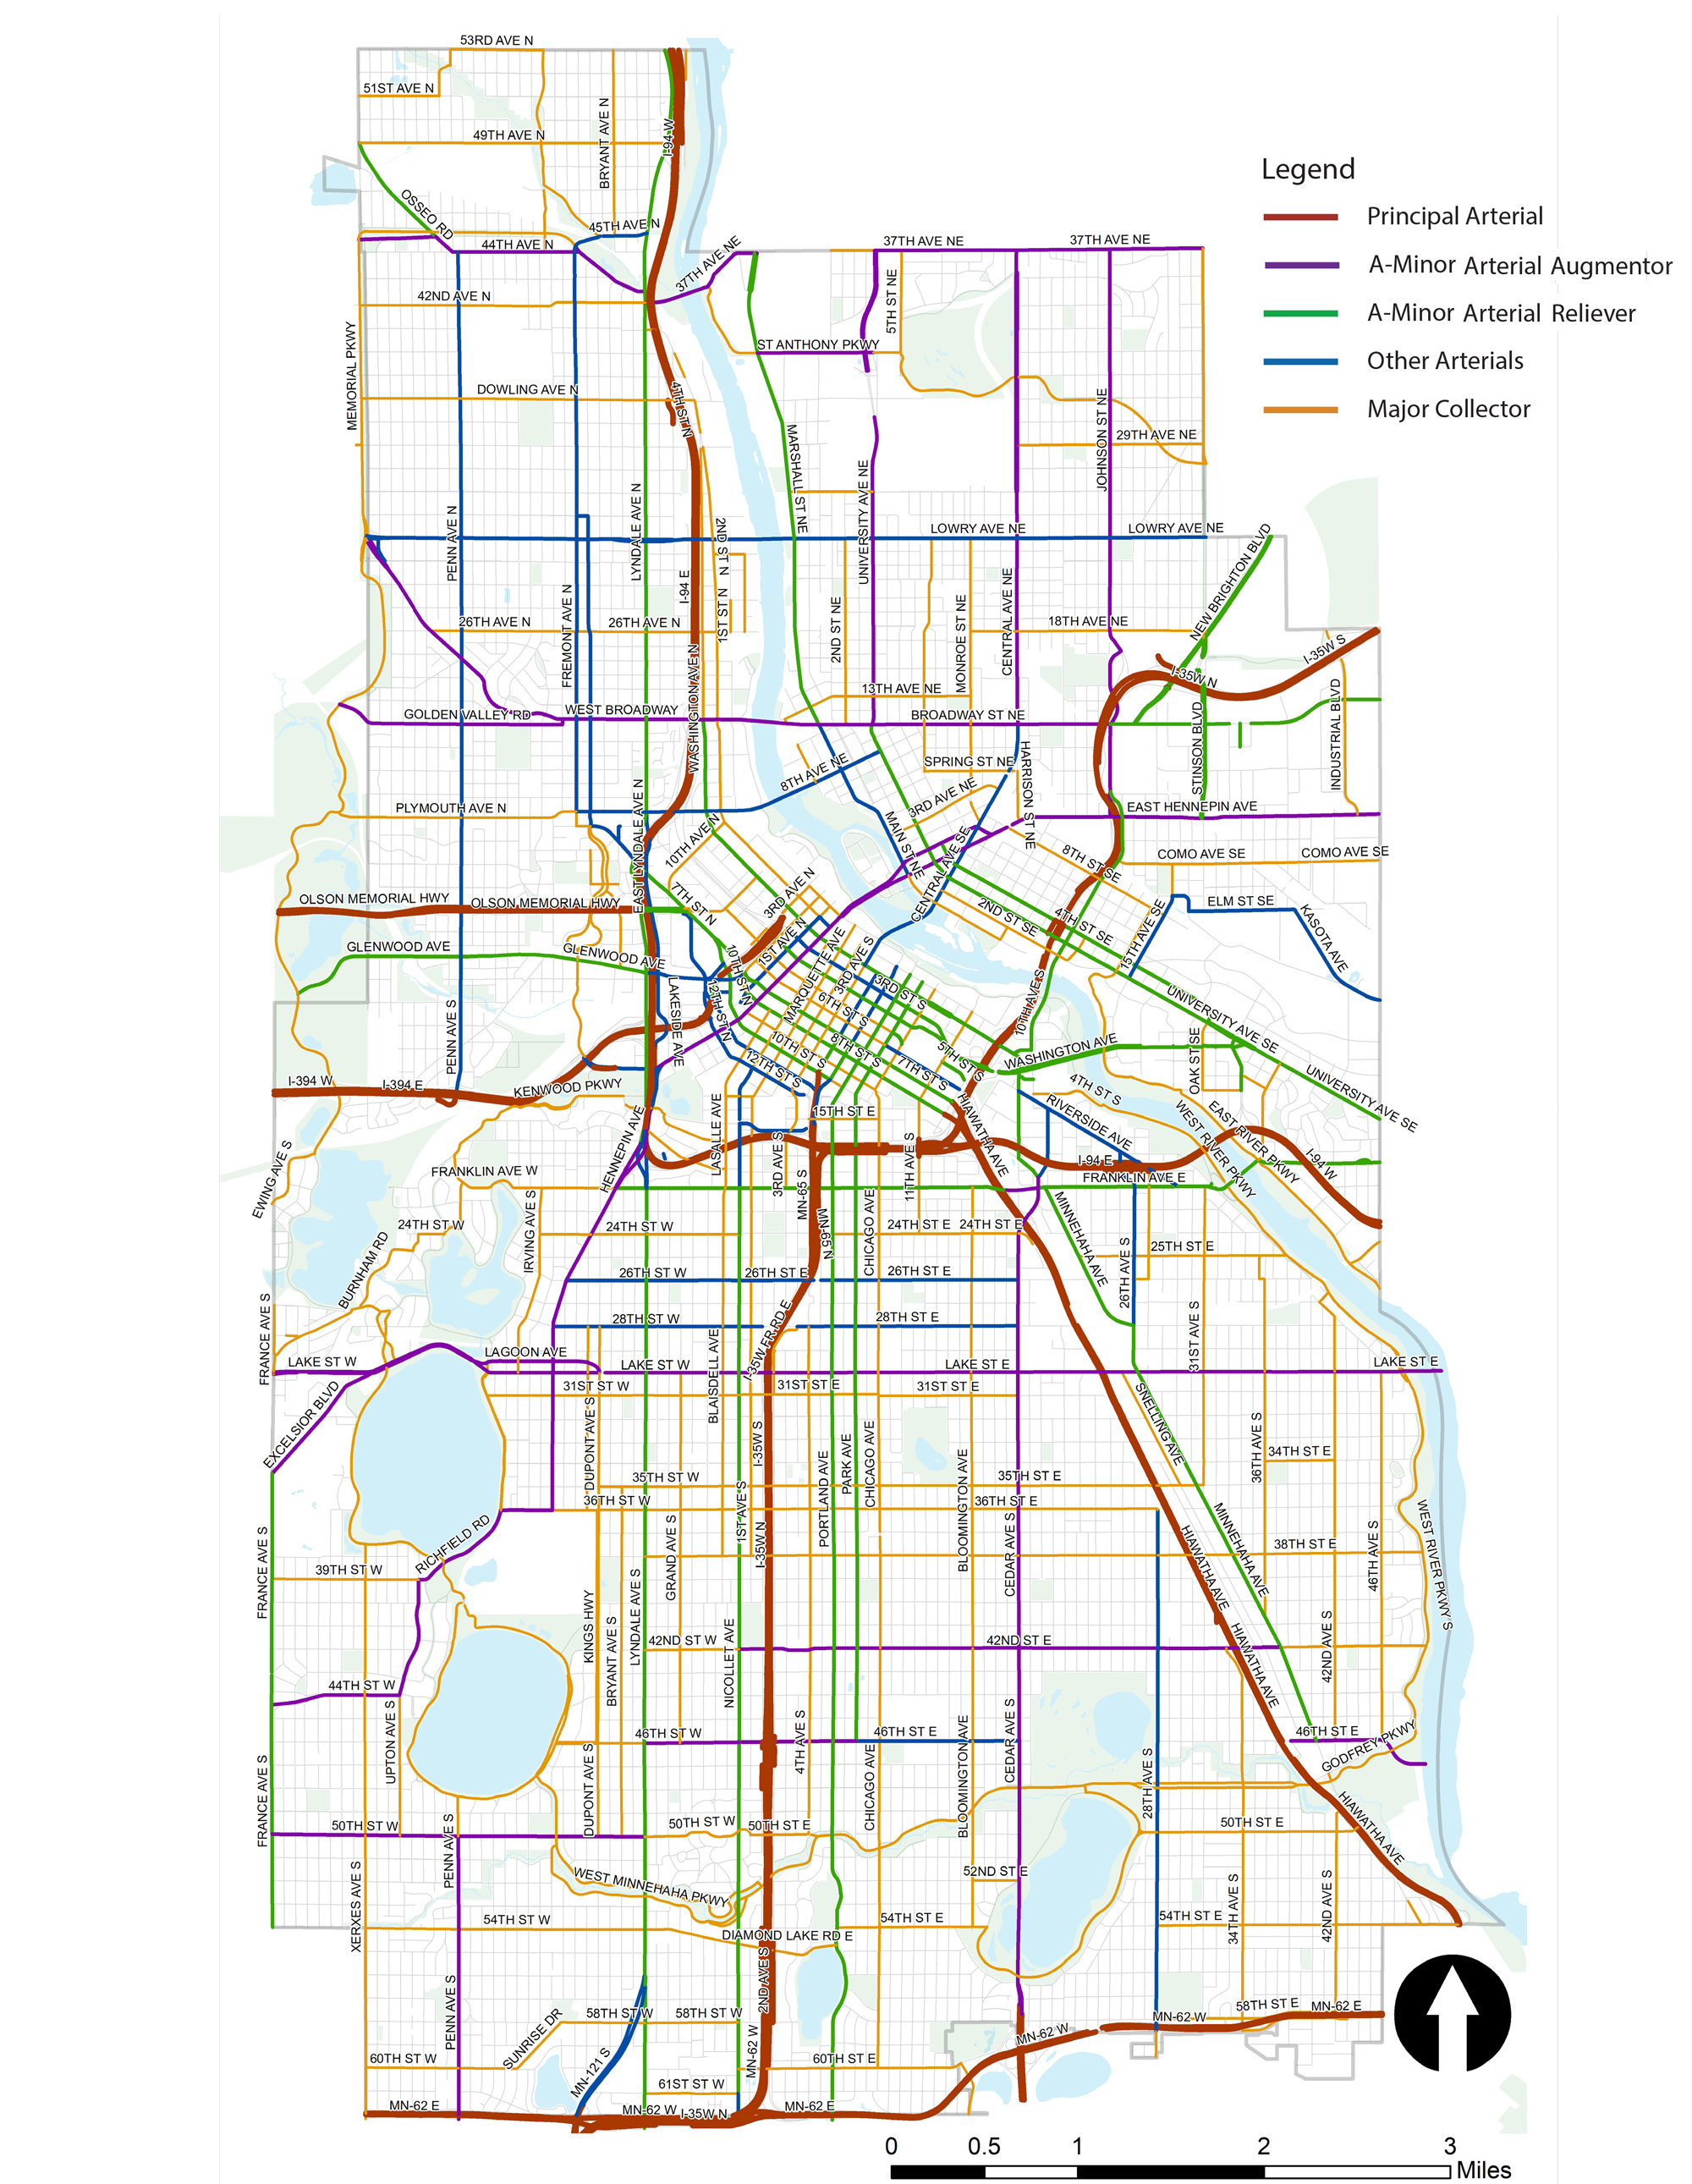 Functional classifications, in Minneapolis, as of 2020